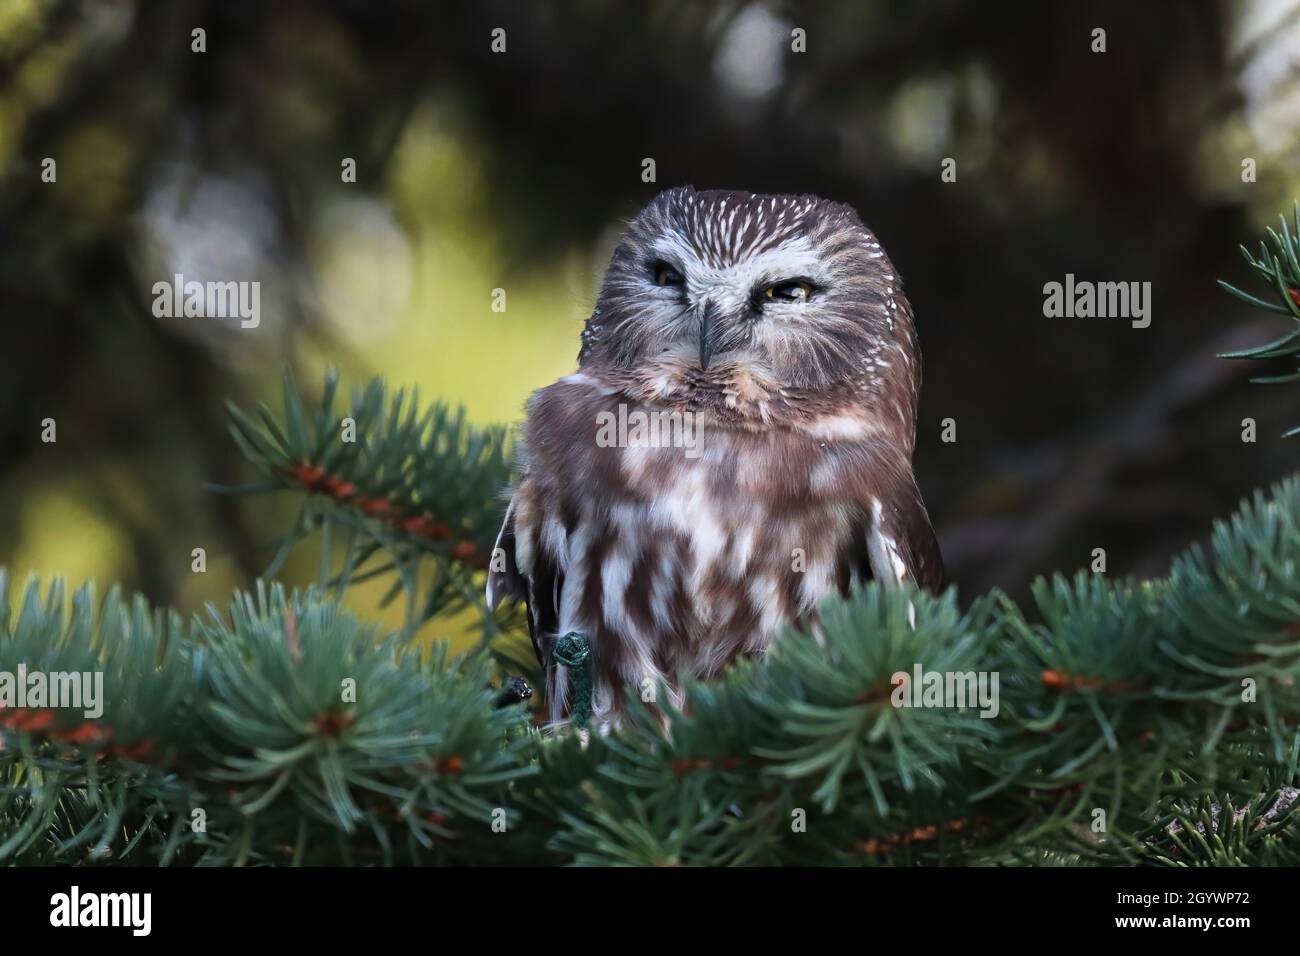 Portrait of a Northern Saw Whet Owl in a tree Stock Photo